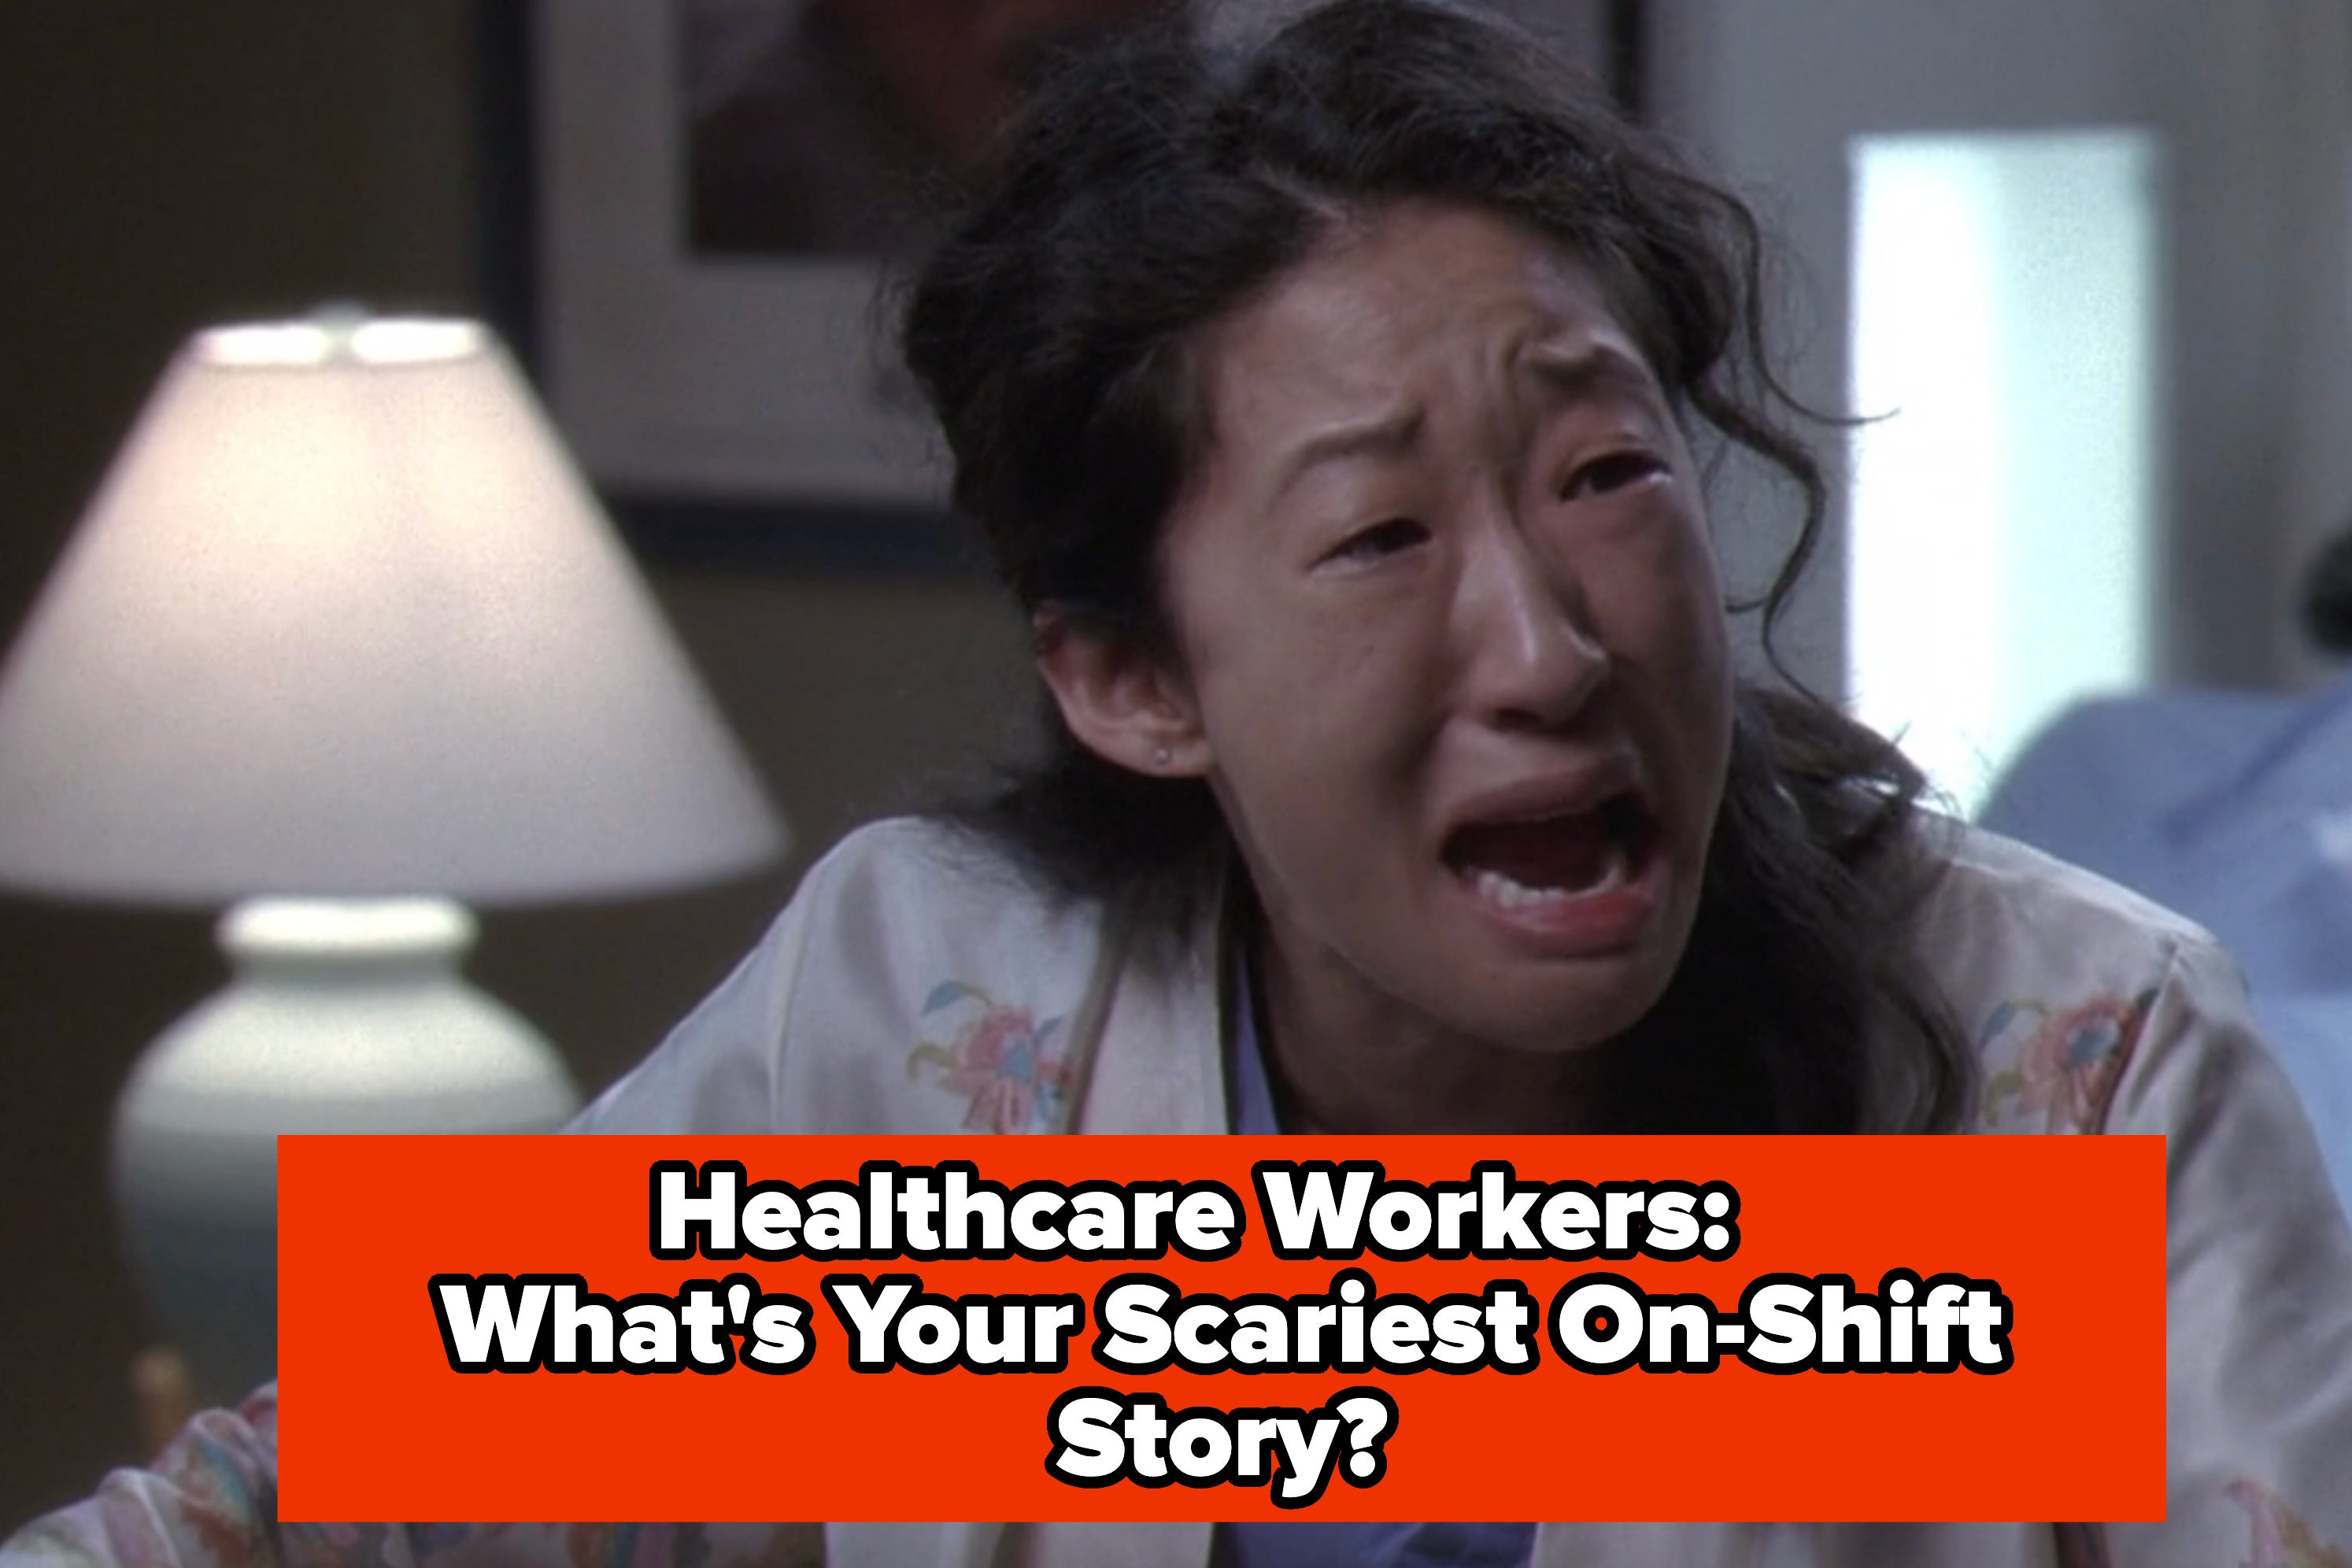 Doctors, Nurses, And Healthcare Workers: What’s The One Moment You Experienced At Work That Genuinely Freaked You Out?